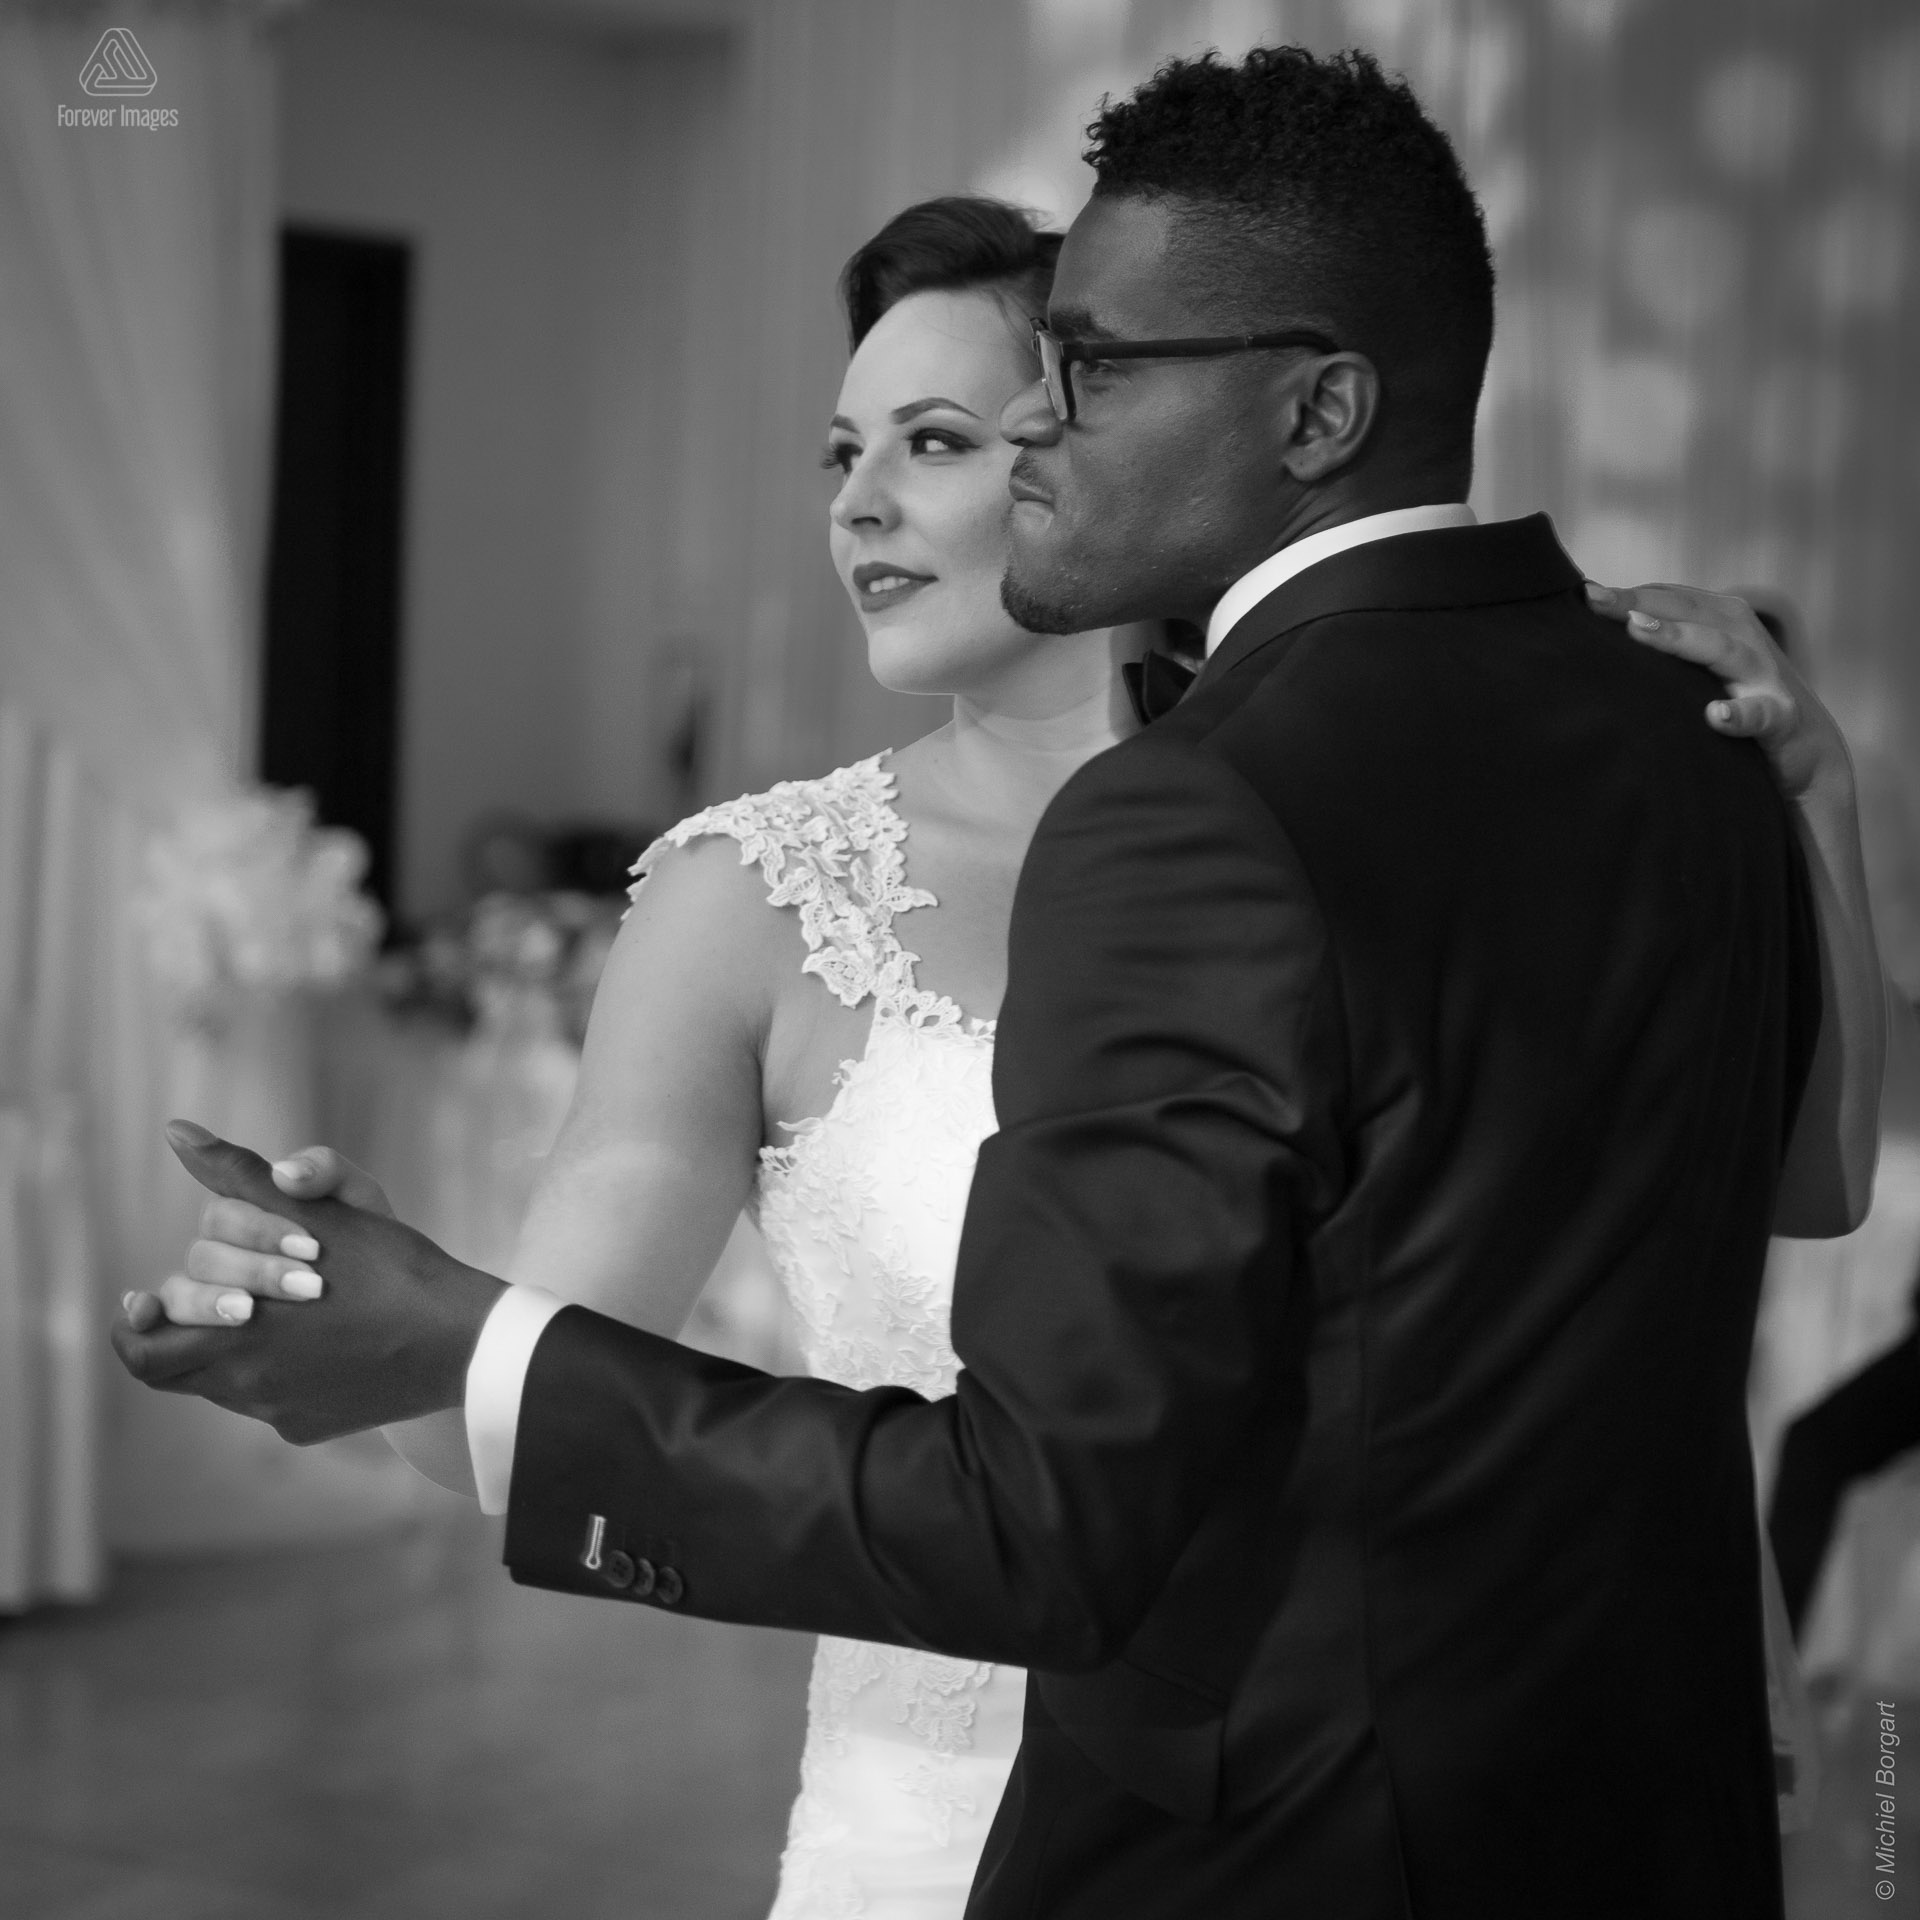 Bridal photo in black and white B&W couple does the opening dance Amsterdam | Clarence Sabrina Versteeg | Wedding Photographer Michiel Borgart - Forever Images.